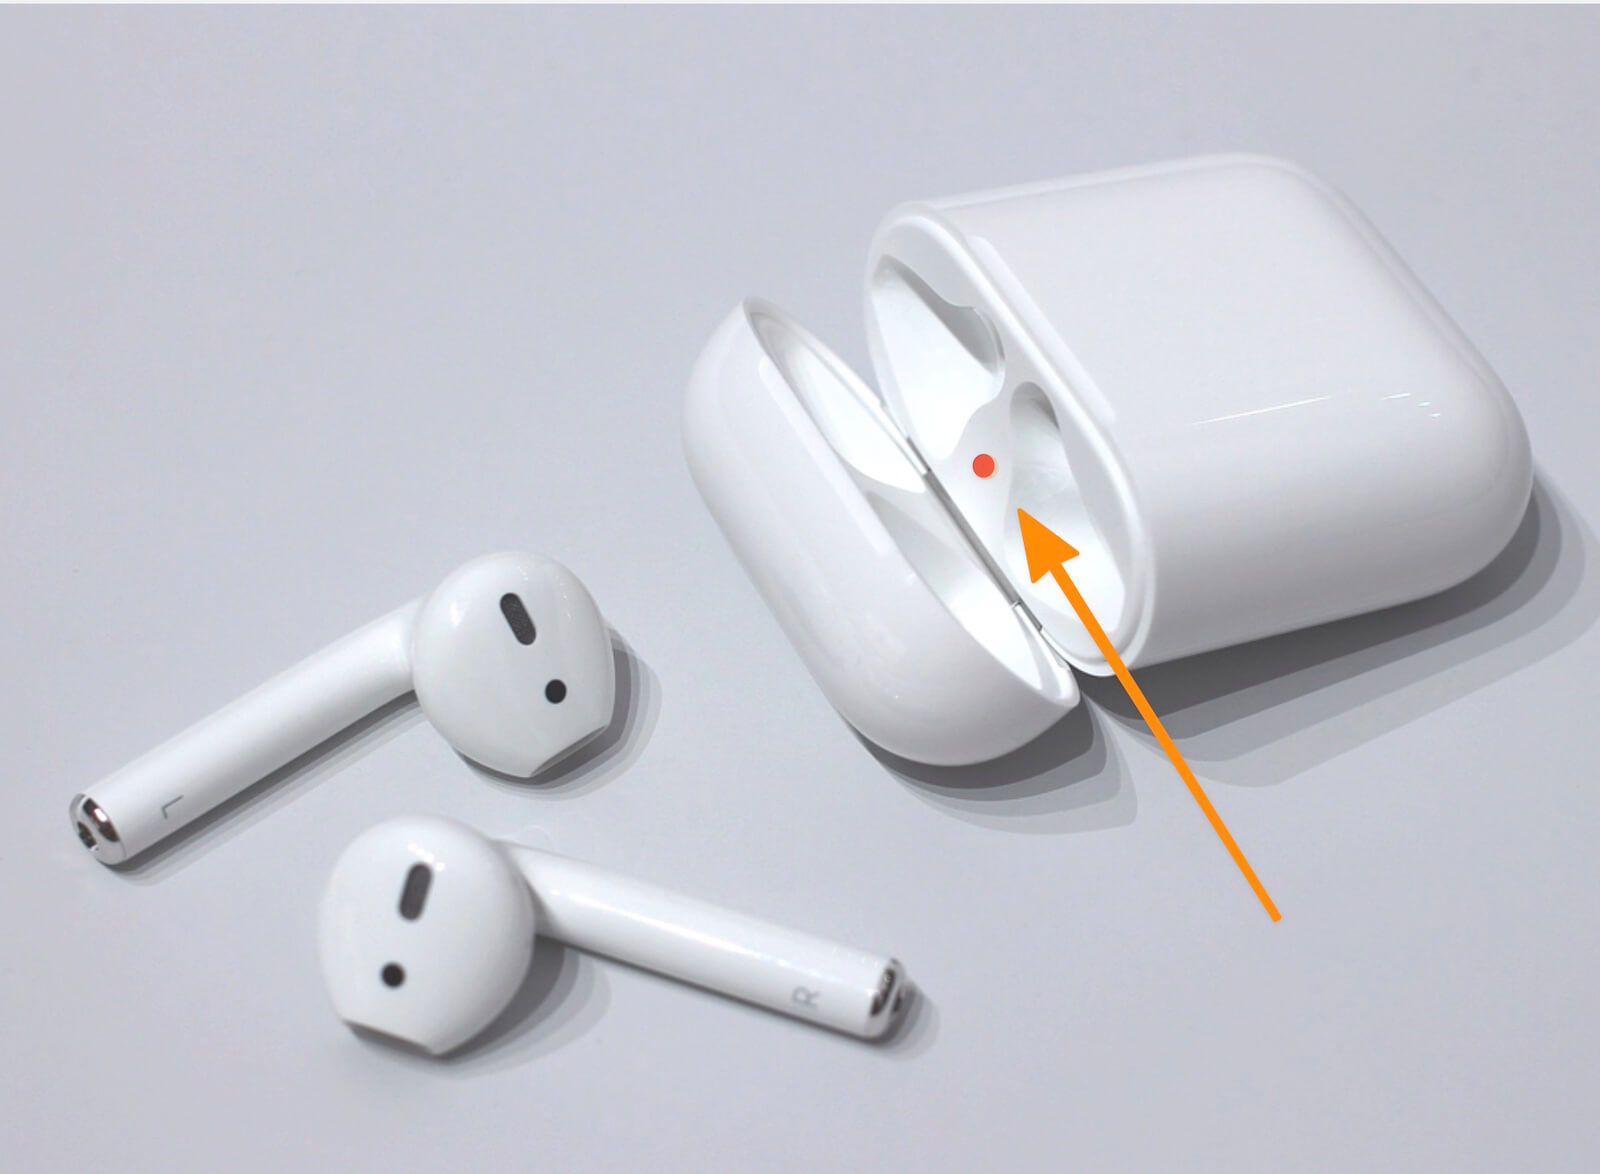 What Does It Mean When Your Airpods Are Flashing Orange